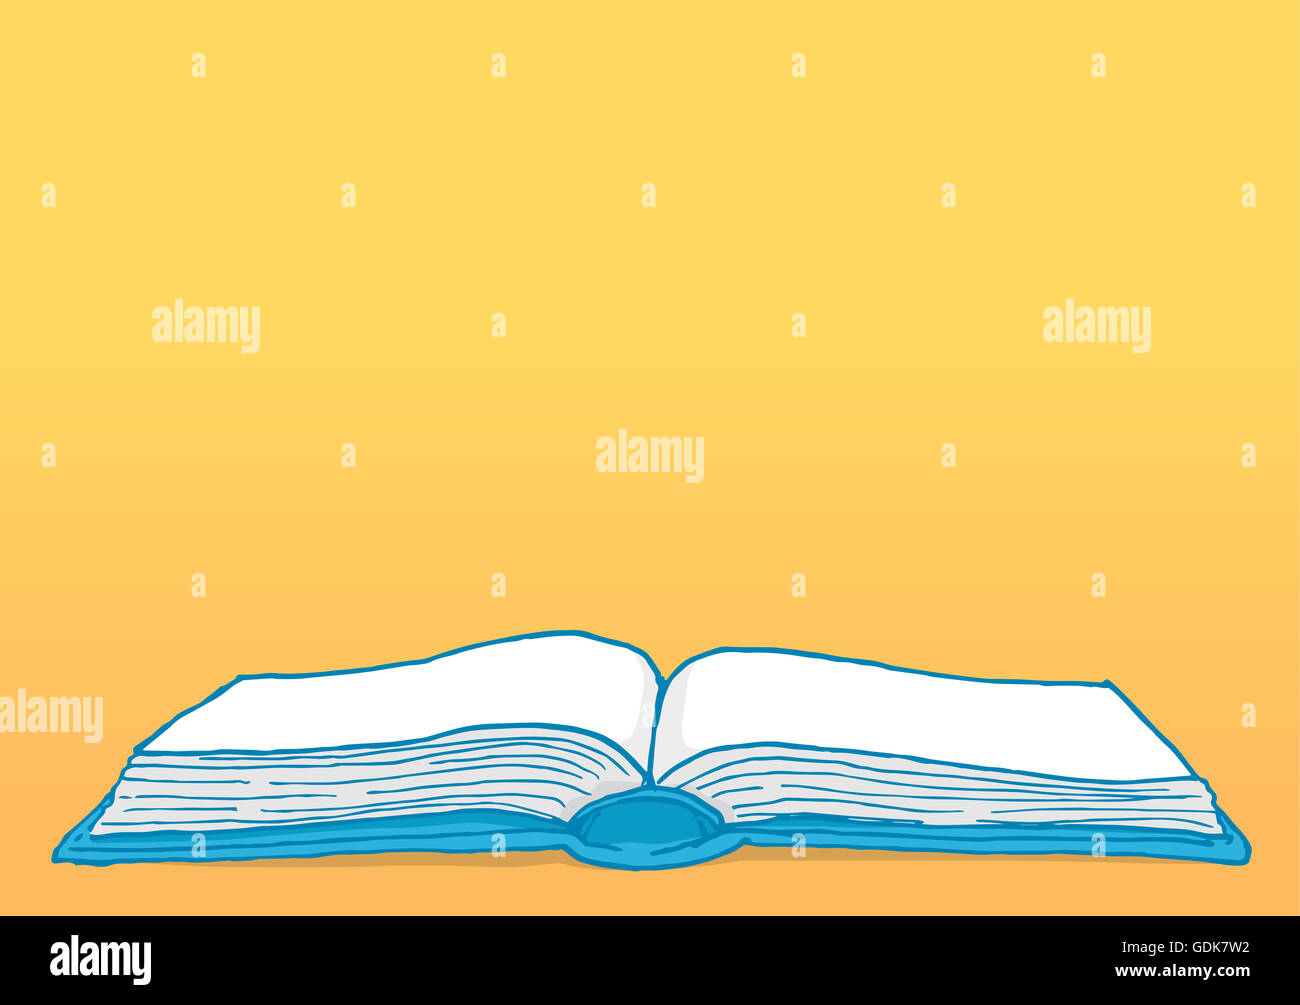 Cartoon illustration education background with blank open book Stock Photo  - Alamy